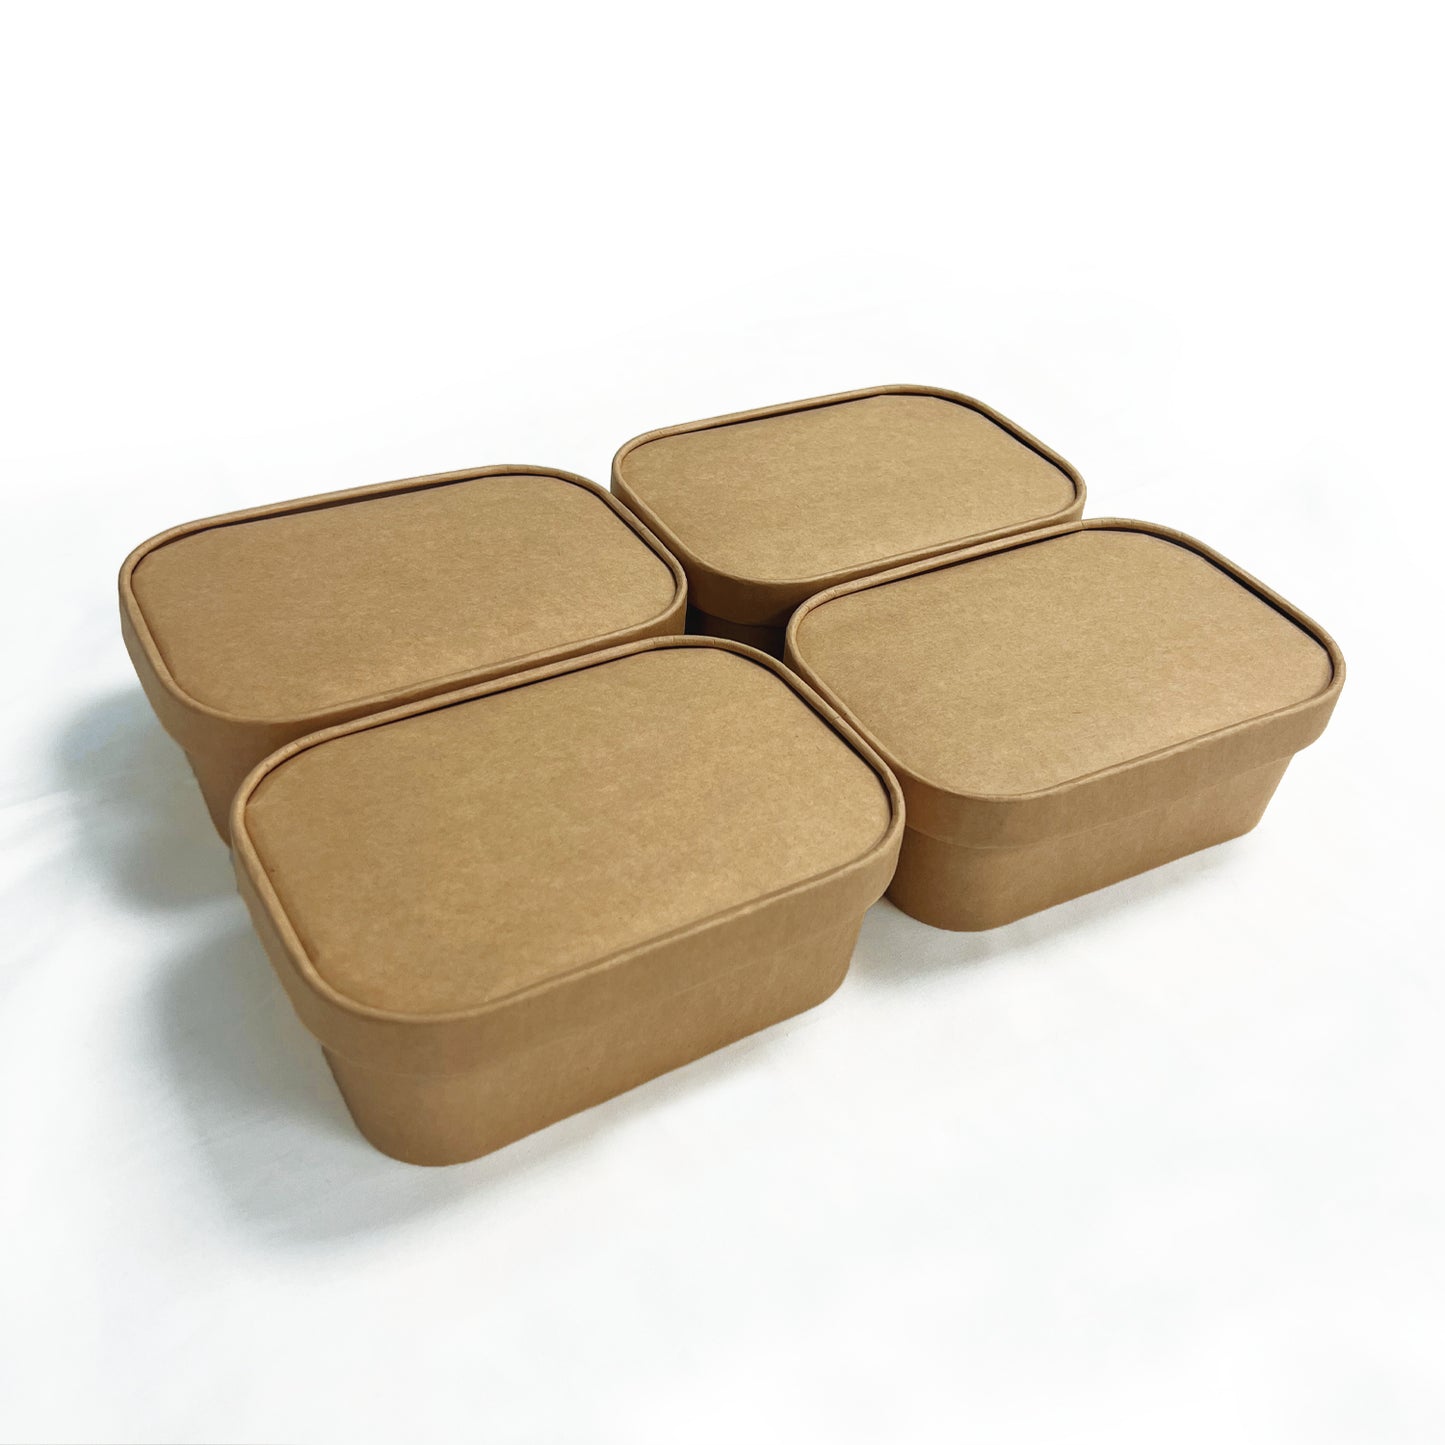 50 Sets/300 Sets, 25oz, 750ml, Kraft Paper Rectangle Containers, with Paper Lids